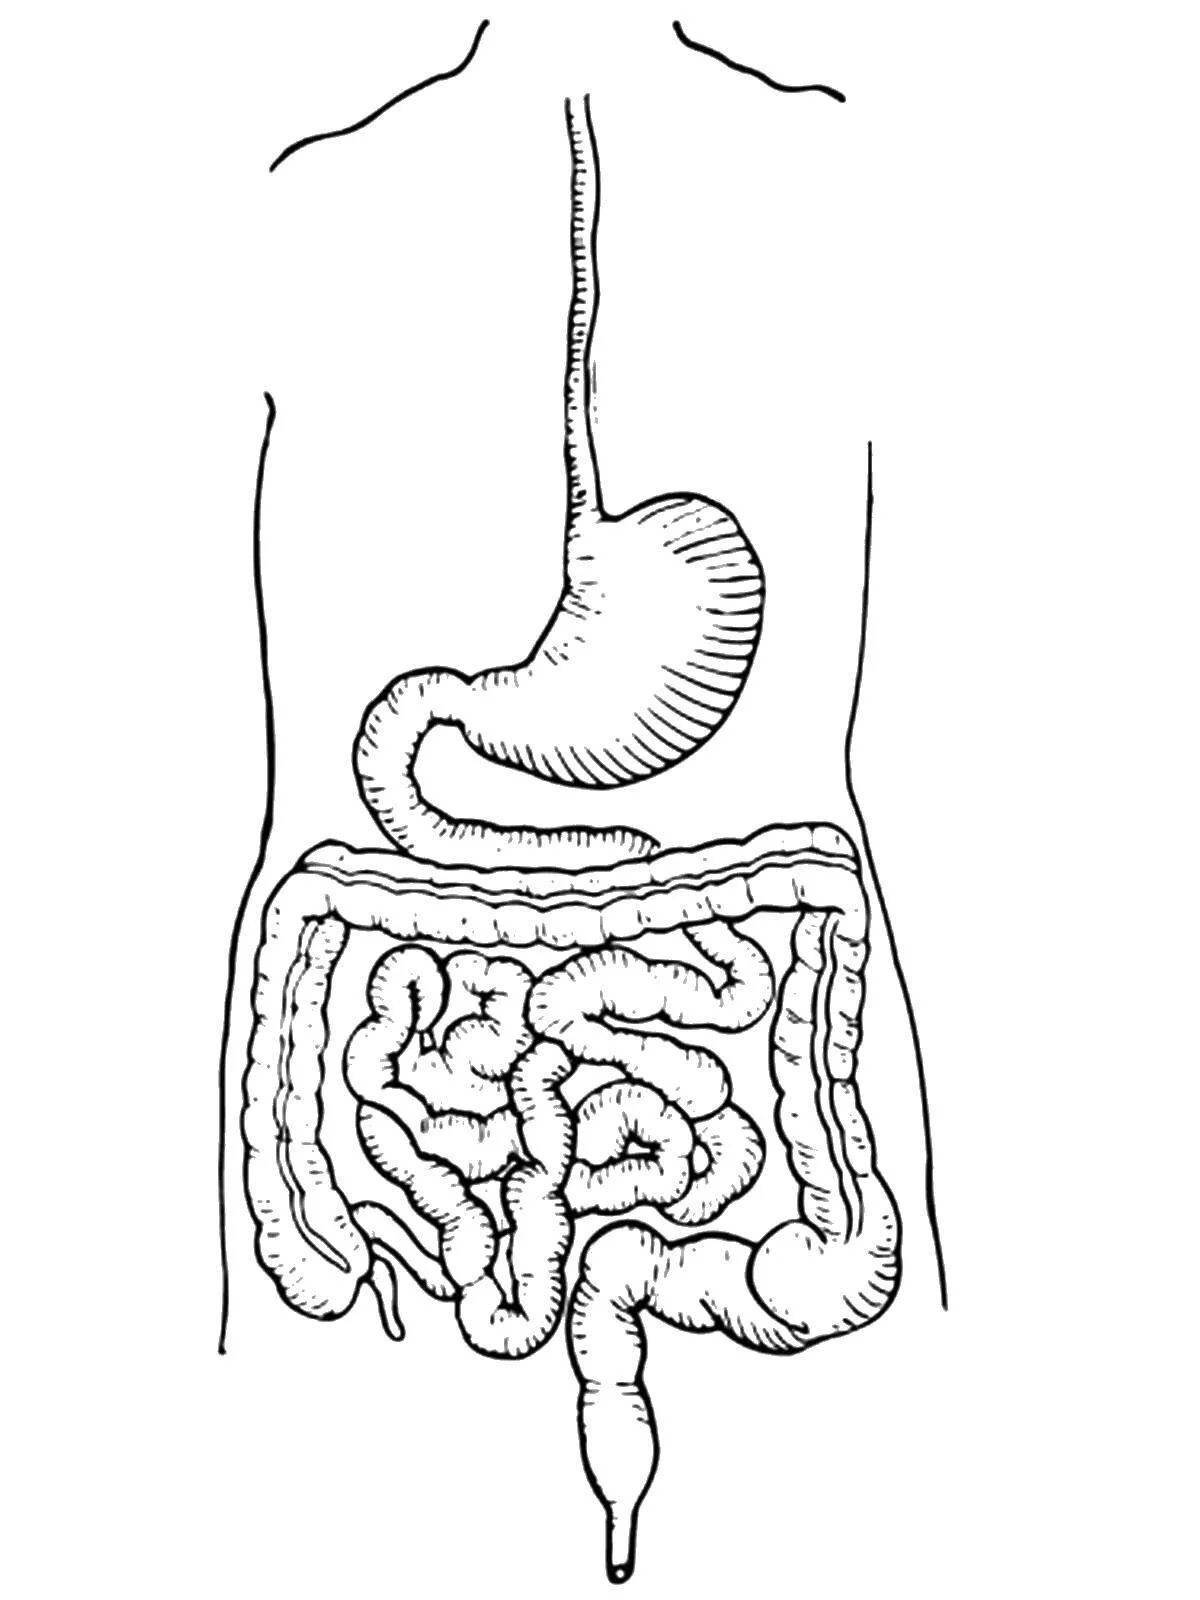 Coloring page of complex digestive system